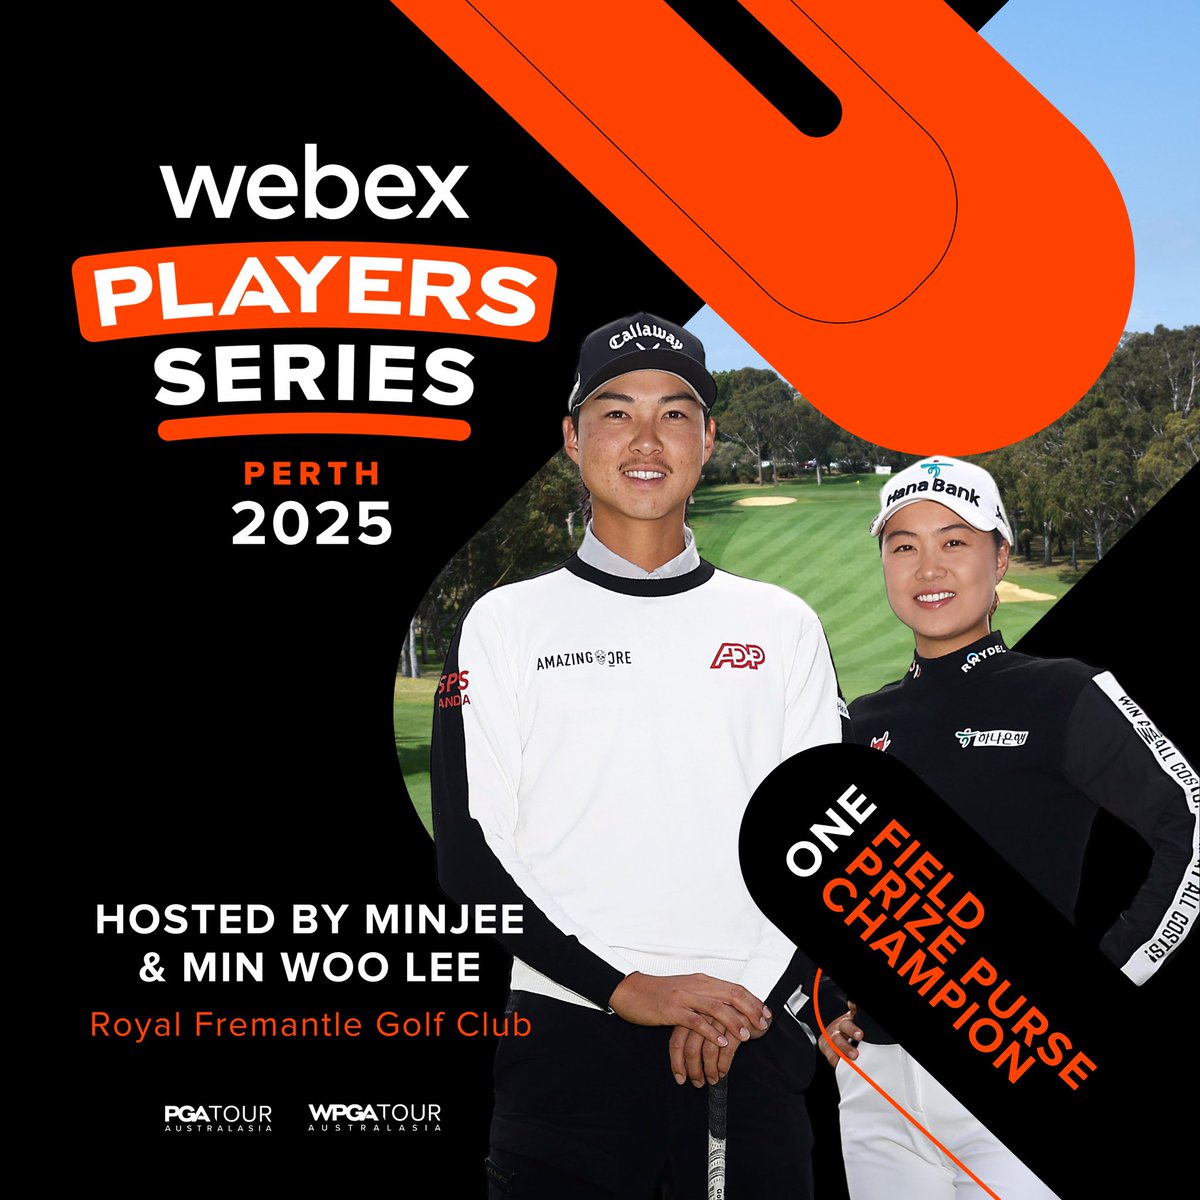 Locked in for three years 🤝 The @Webex Players Series is expanding to Perth with a new event hosted by @minjeegolf and @Minwoo27Lee on both the Challenger PGA Tour of Australasia and @WPGATour. From 2024/25, we'll have six events where women and men will compete against…